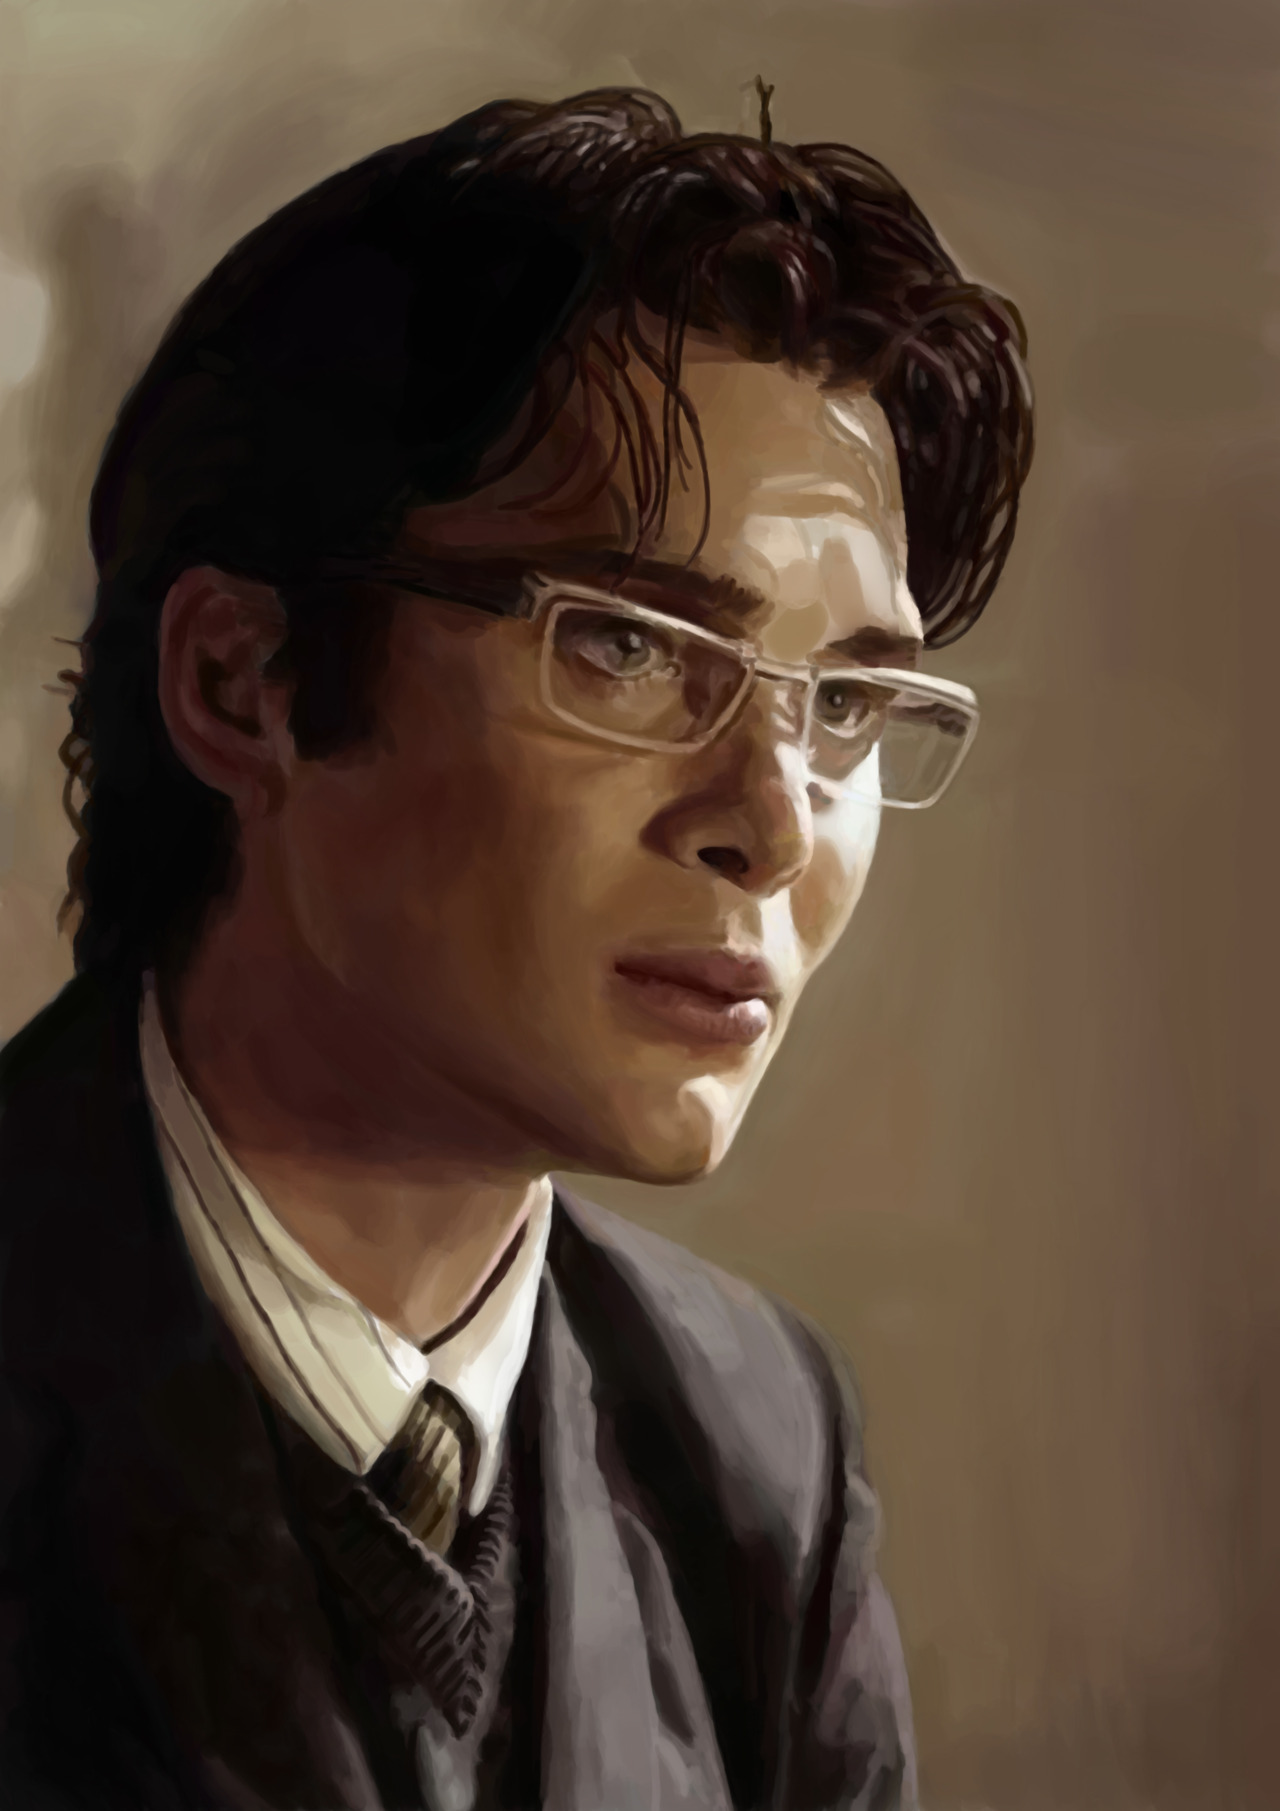 This is a digital painting of the actor Cillian Murphy. Done for a friend. It is one of the best works i had ever done but took the longest due to time constraints. I am intending to do more work like this and if people are interested, i can paint...